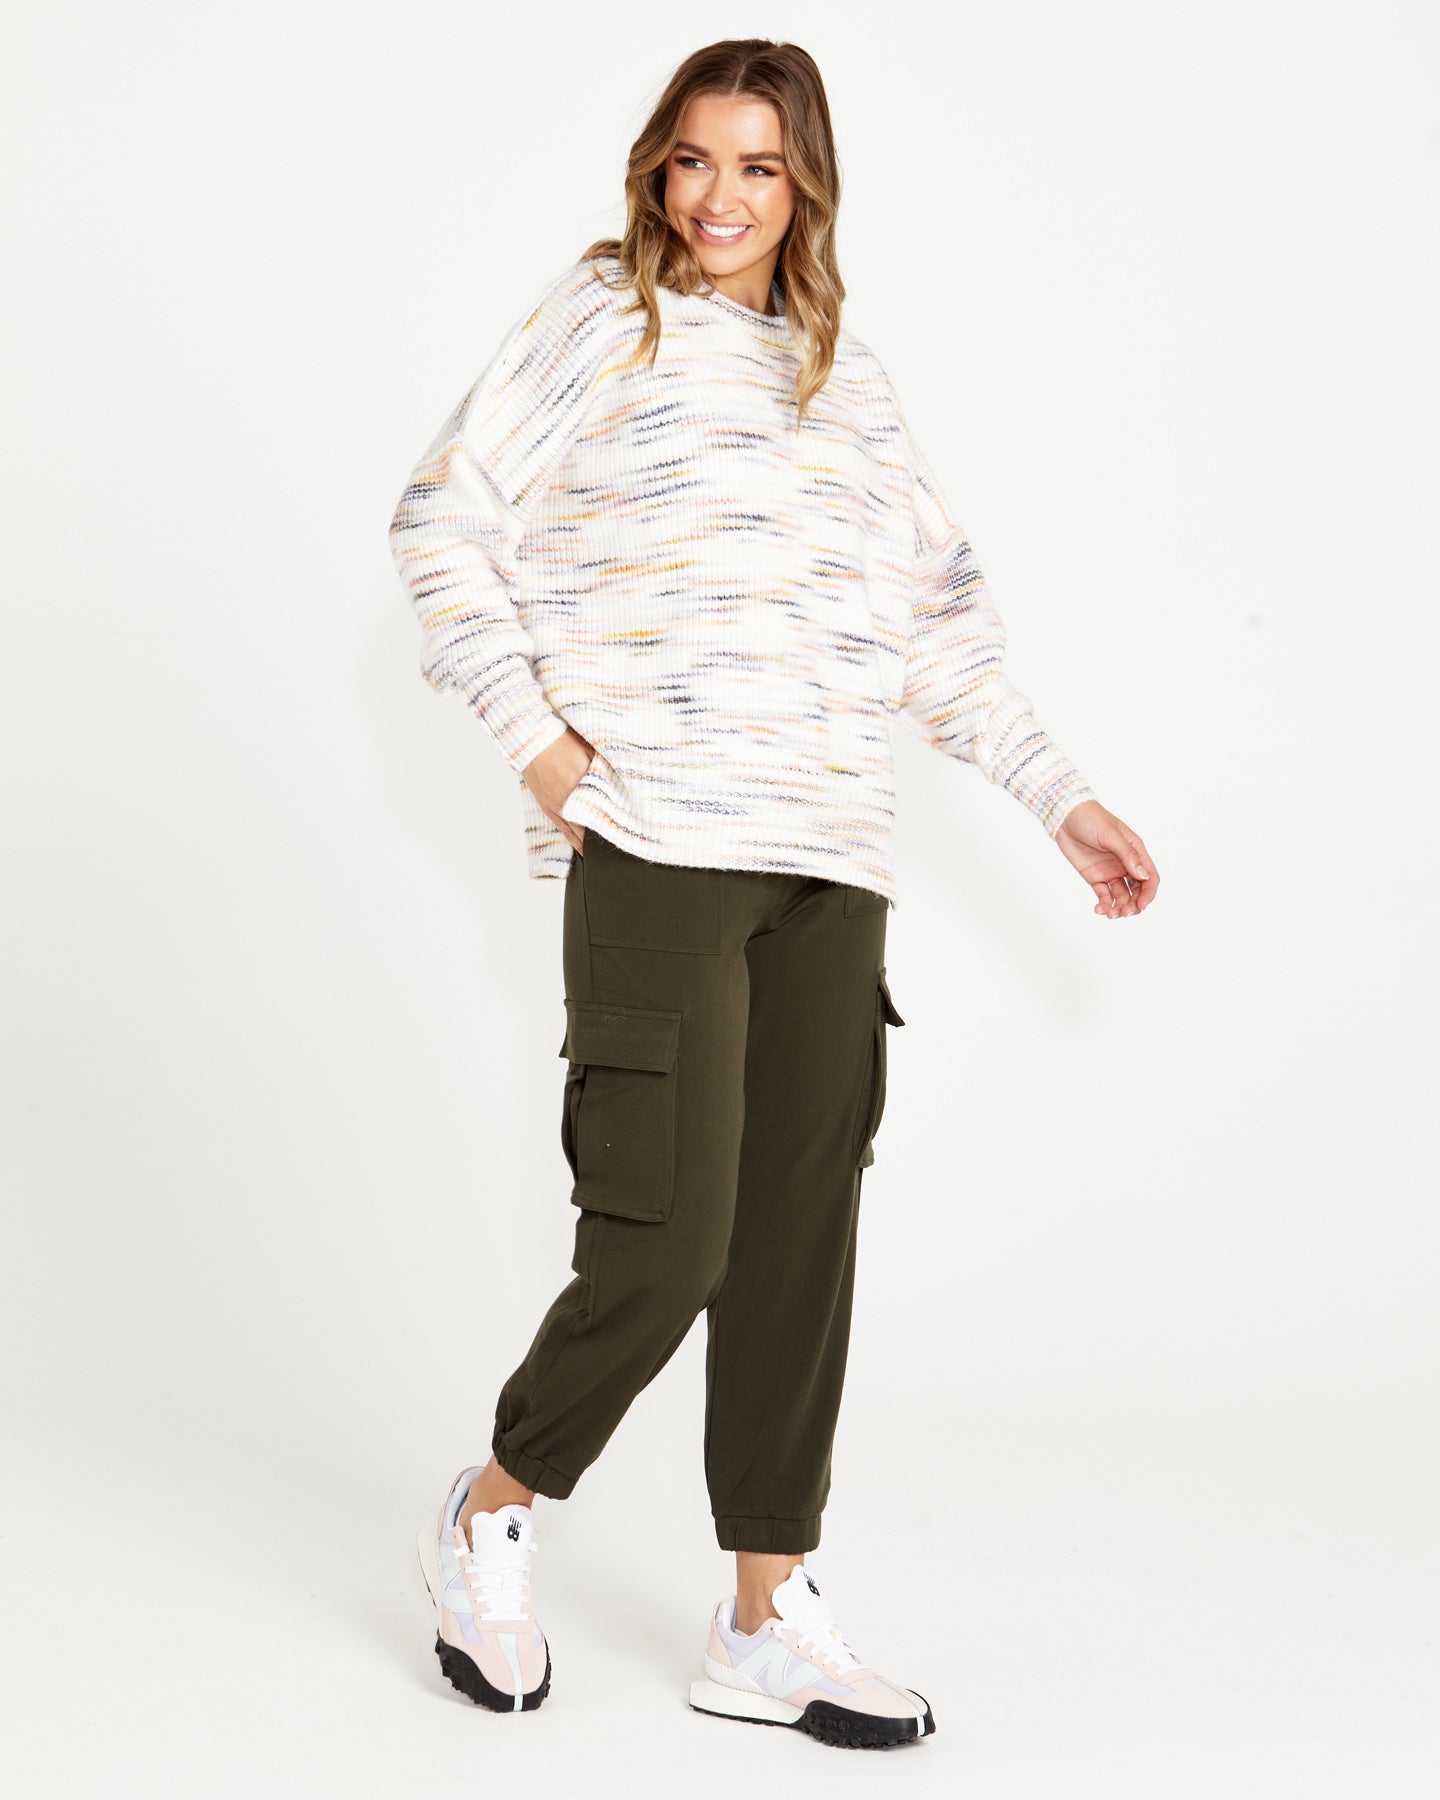 Pepper Space Jumper - Rainbow Marle-Knitwear & Jumpers-SASS-The Bay Room